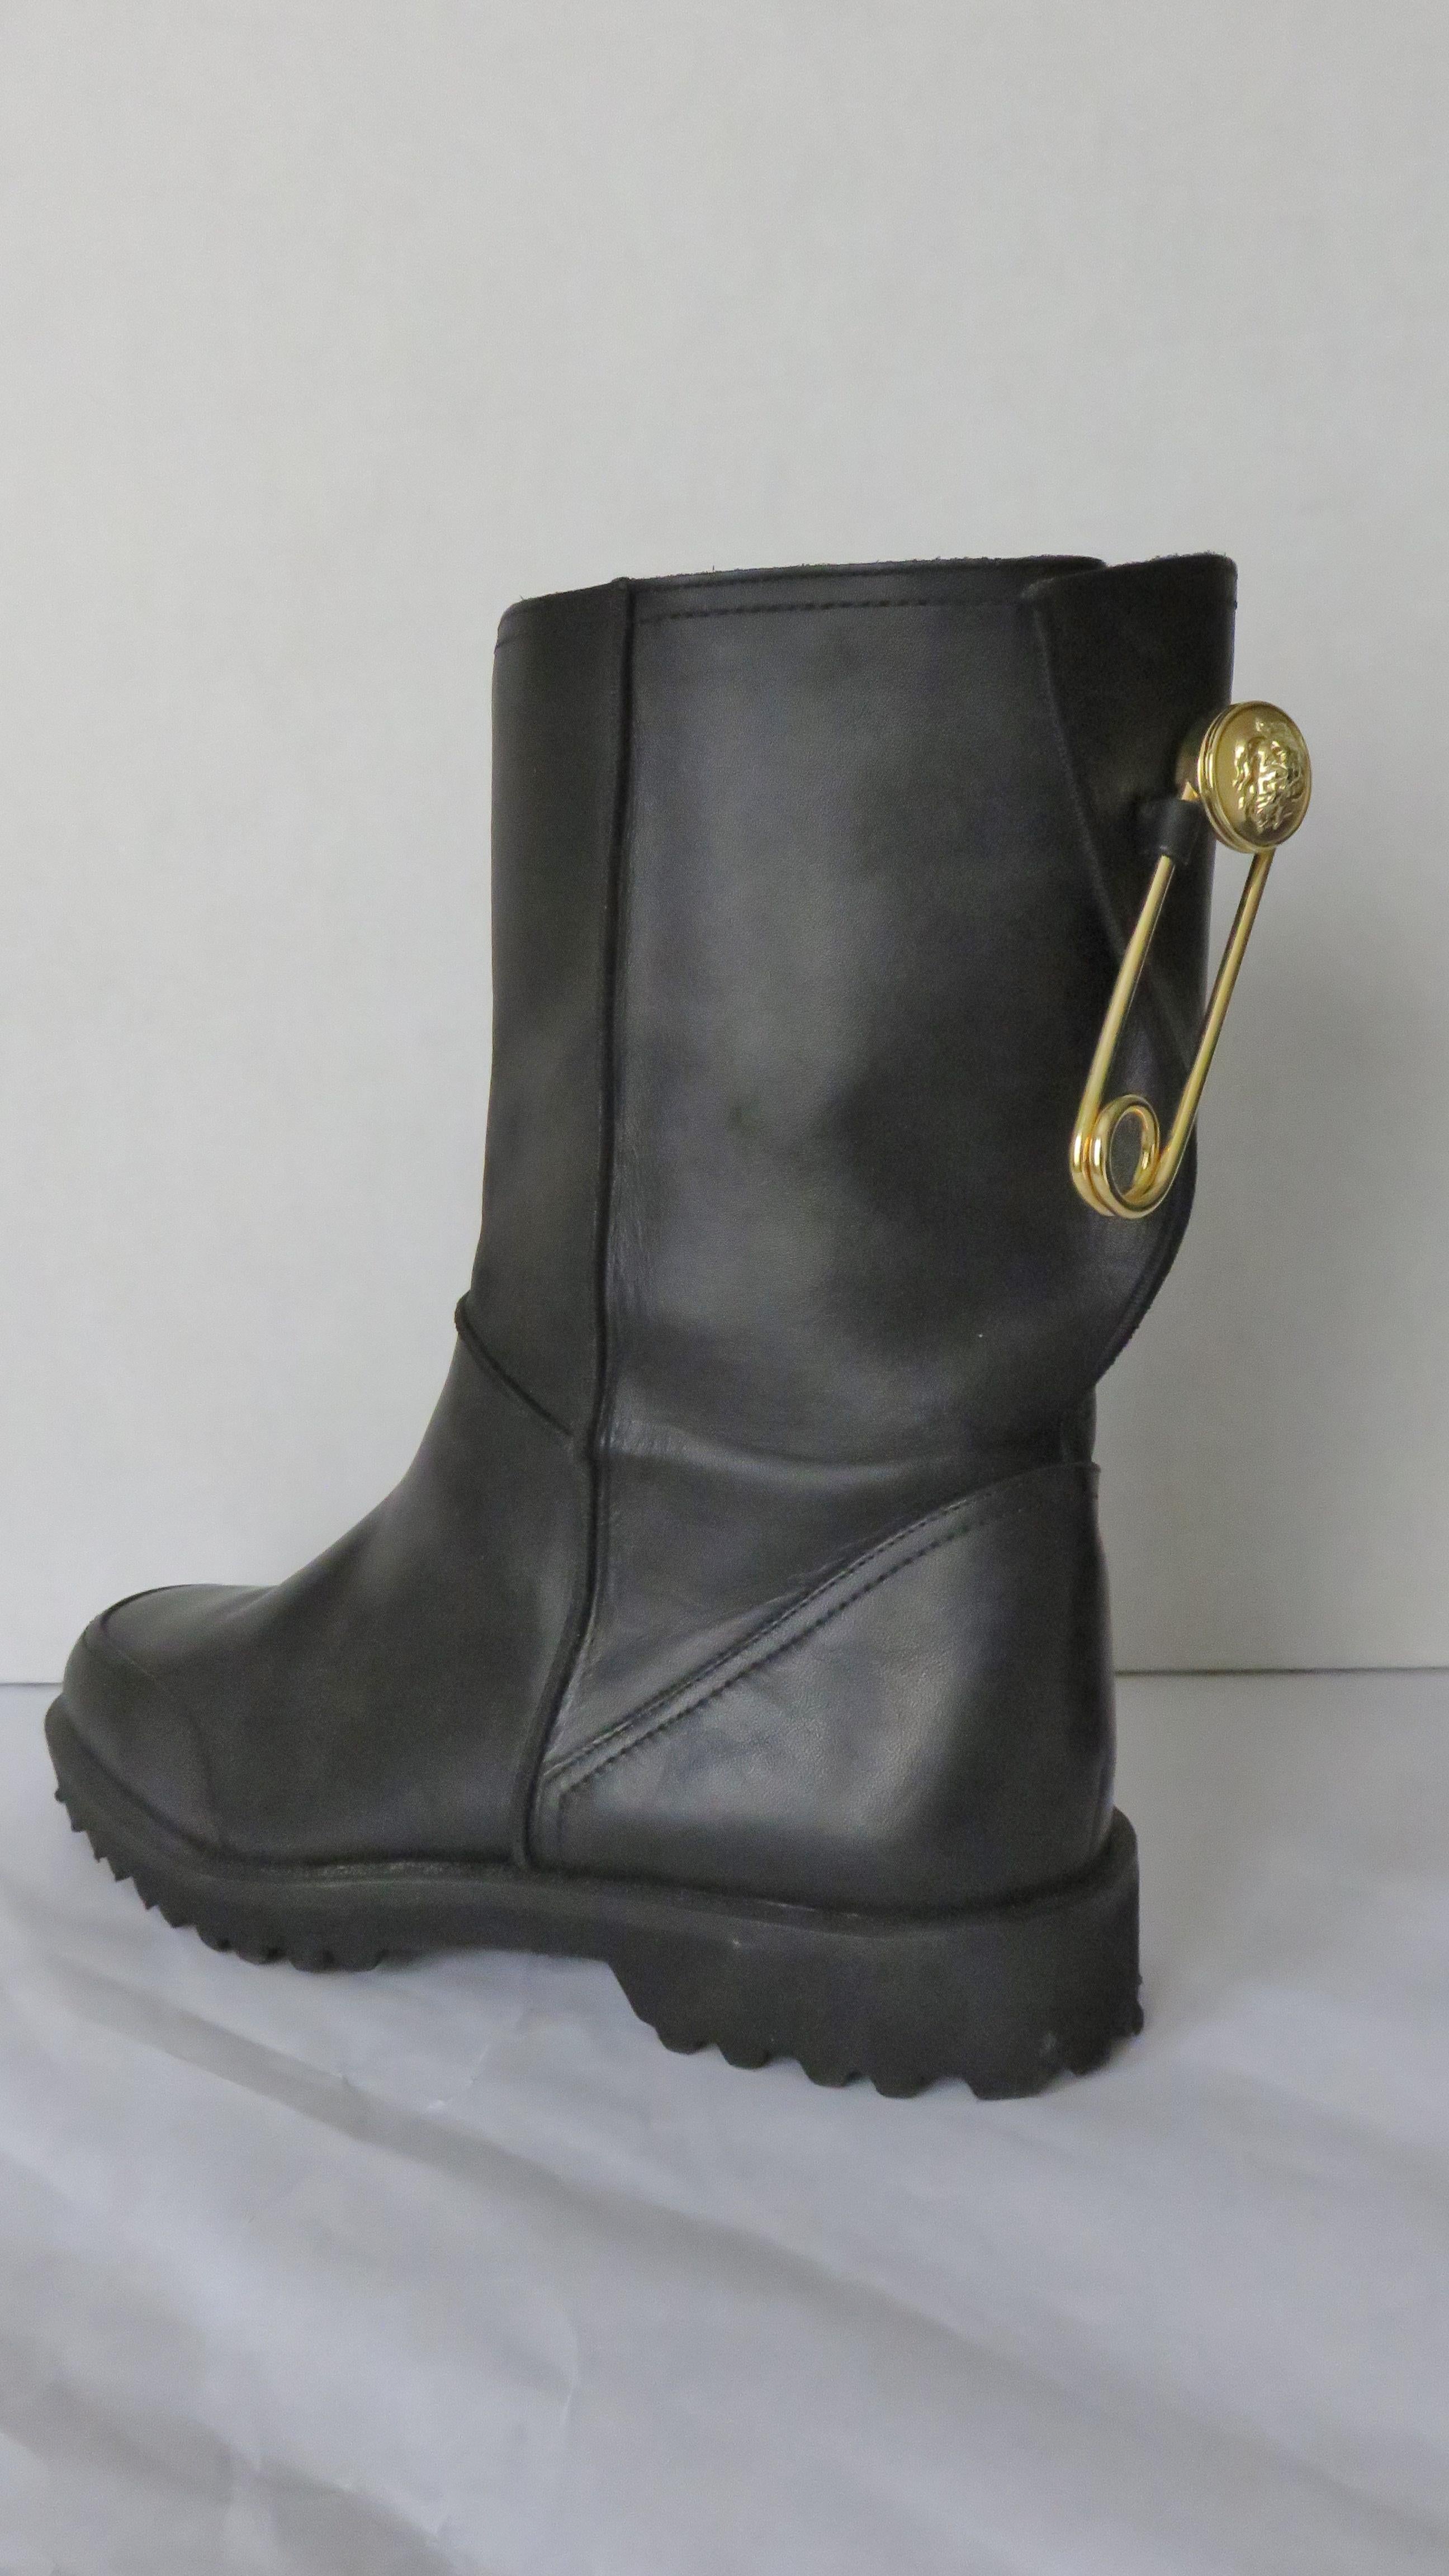 Gianni Versace New Size 37.5 Safety Pin Boots 1990s 3